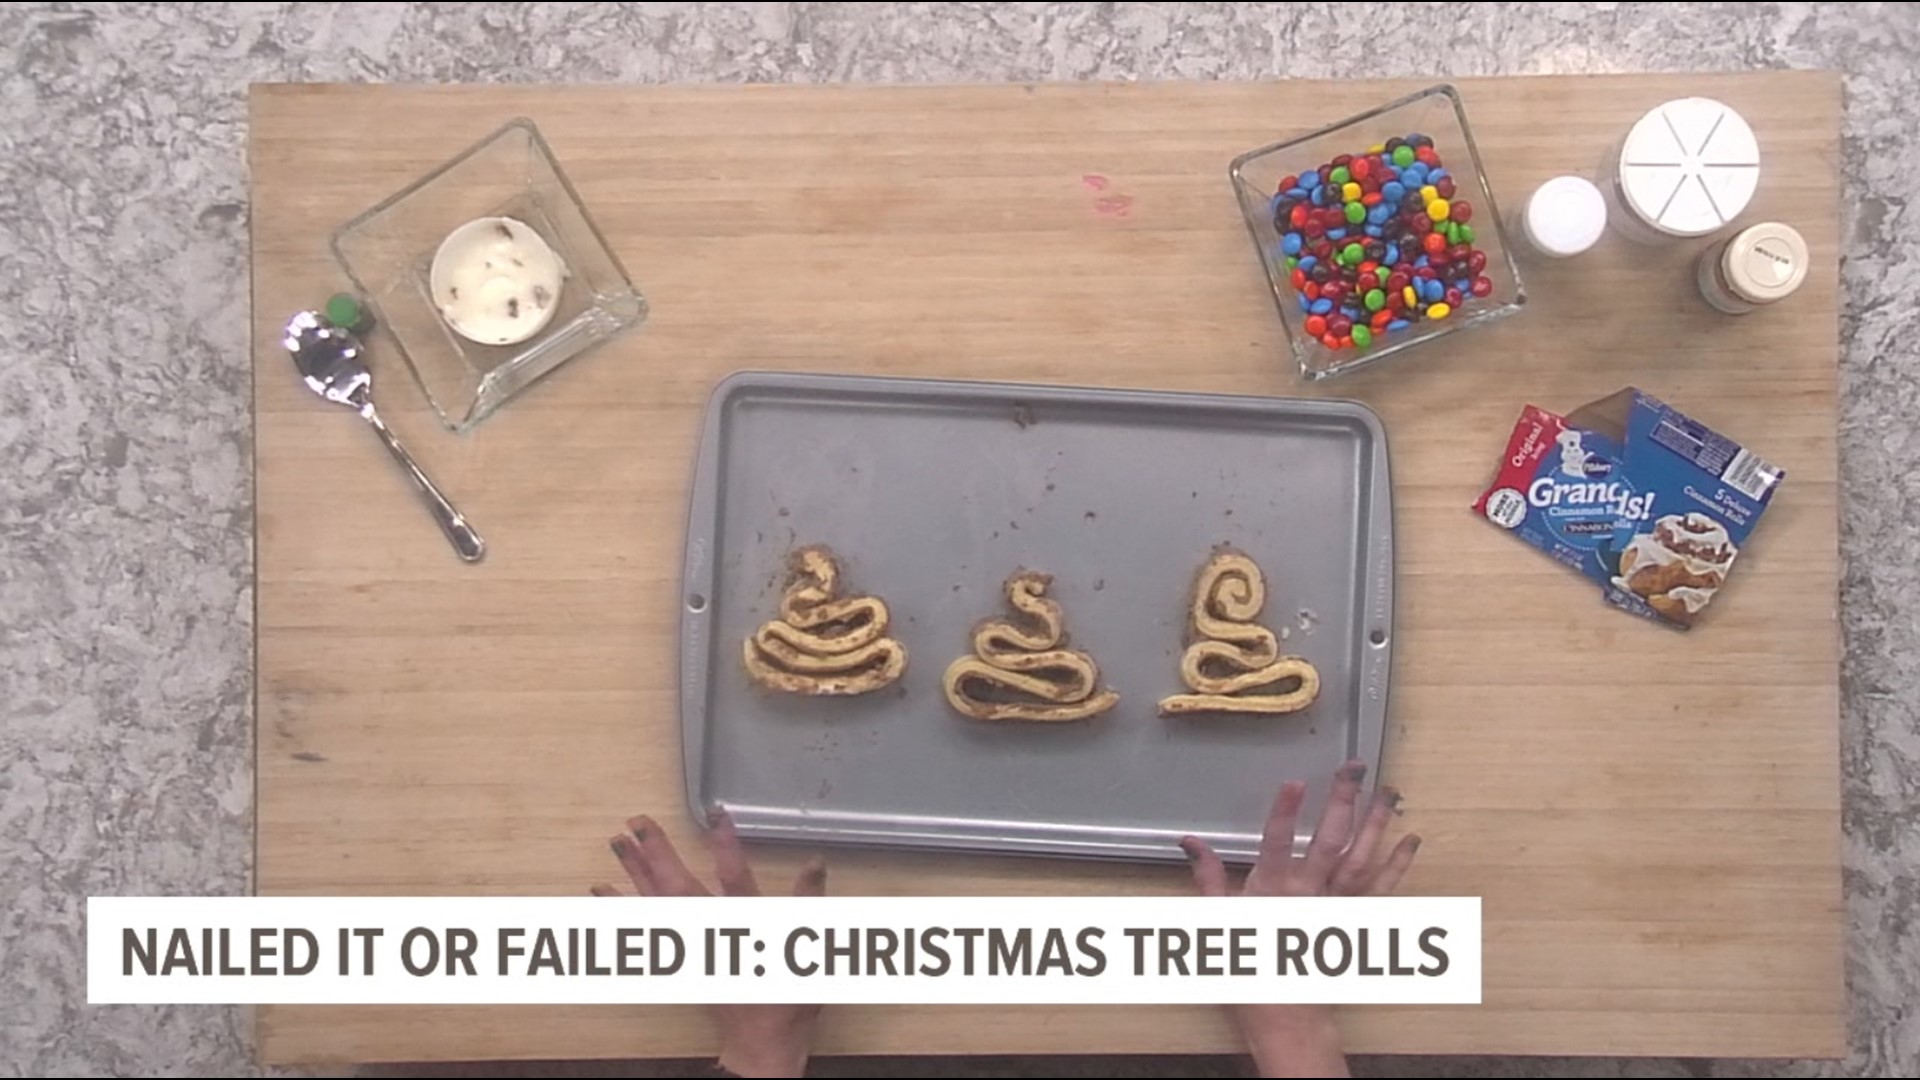 For Christmas morning, take your cinnamon roll game up a notch!